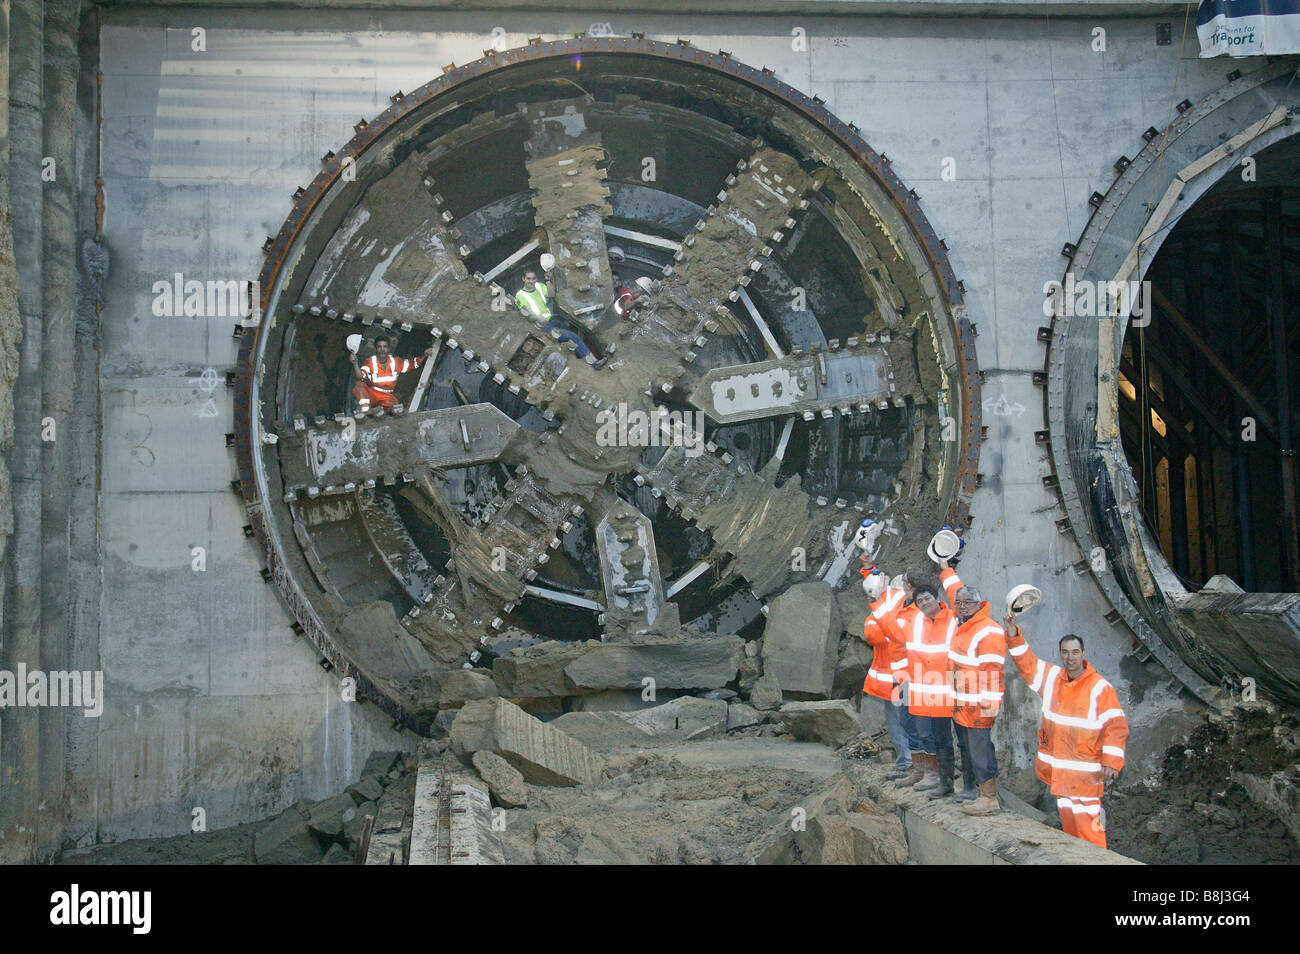 8.15m earth pressure balance Boring Machine 'Bertha' breakthrough at King's Cross, London, on Channel Tunnel Rail Link project. Stock Photo